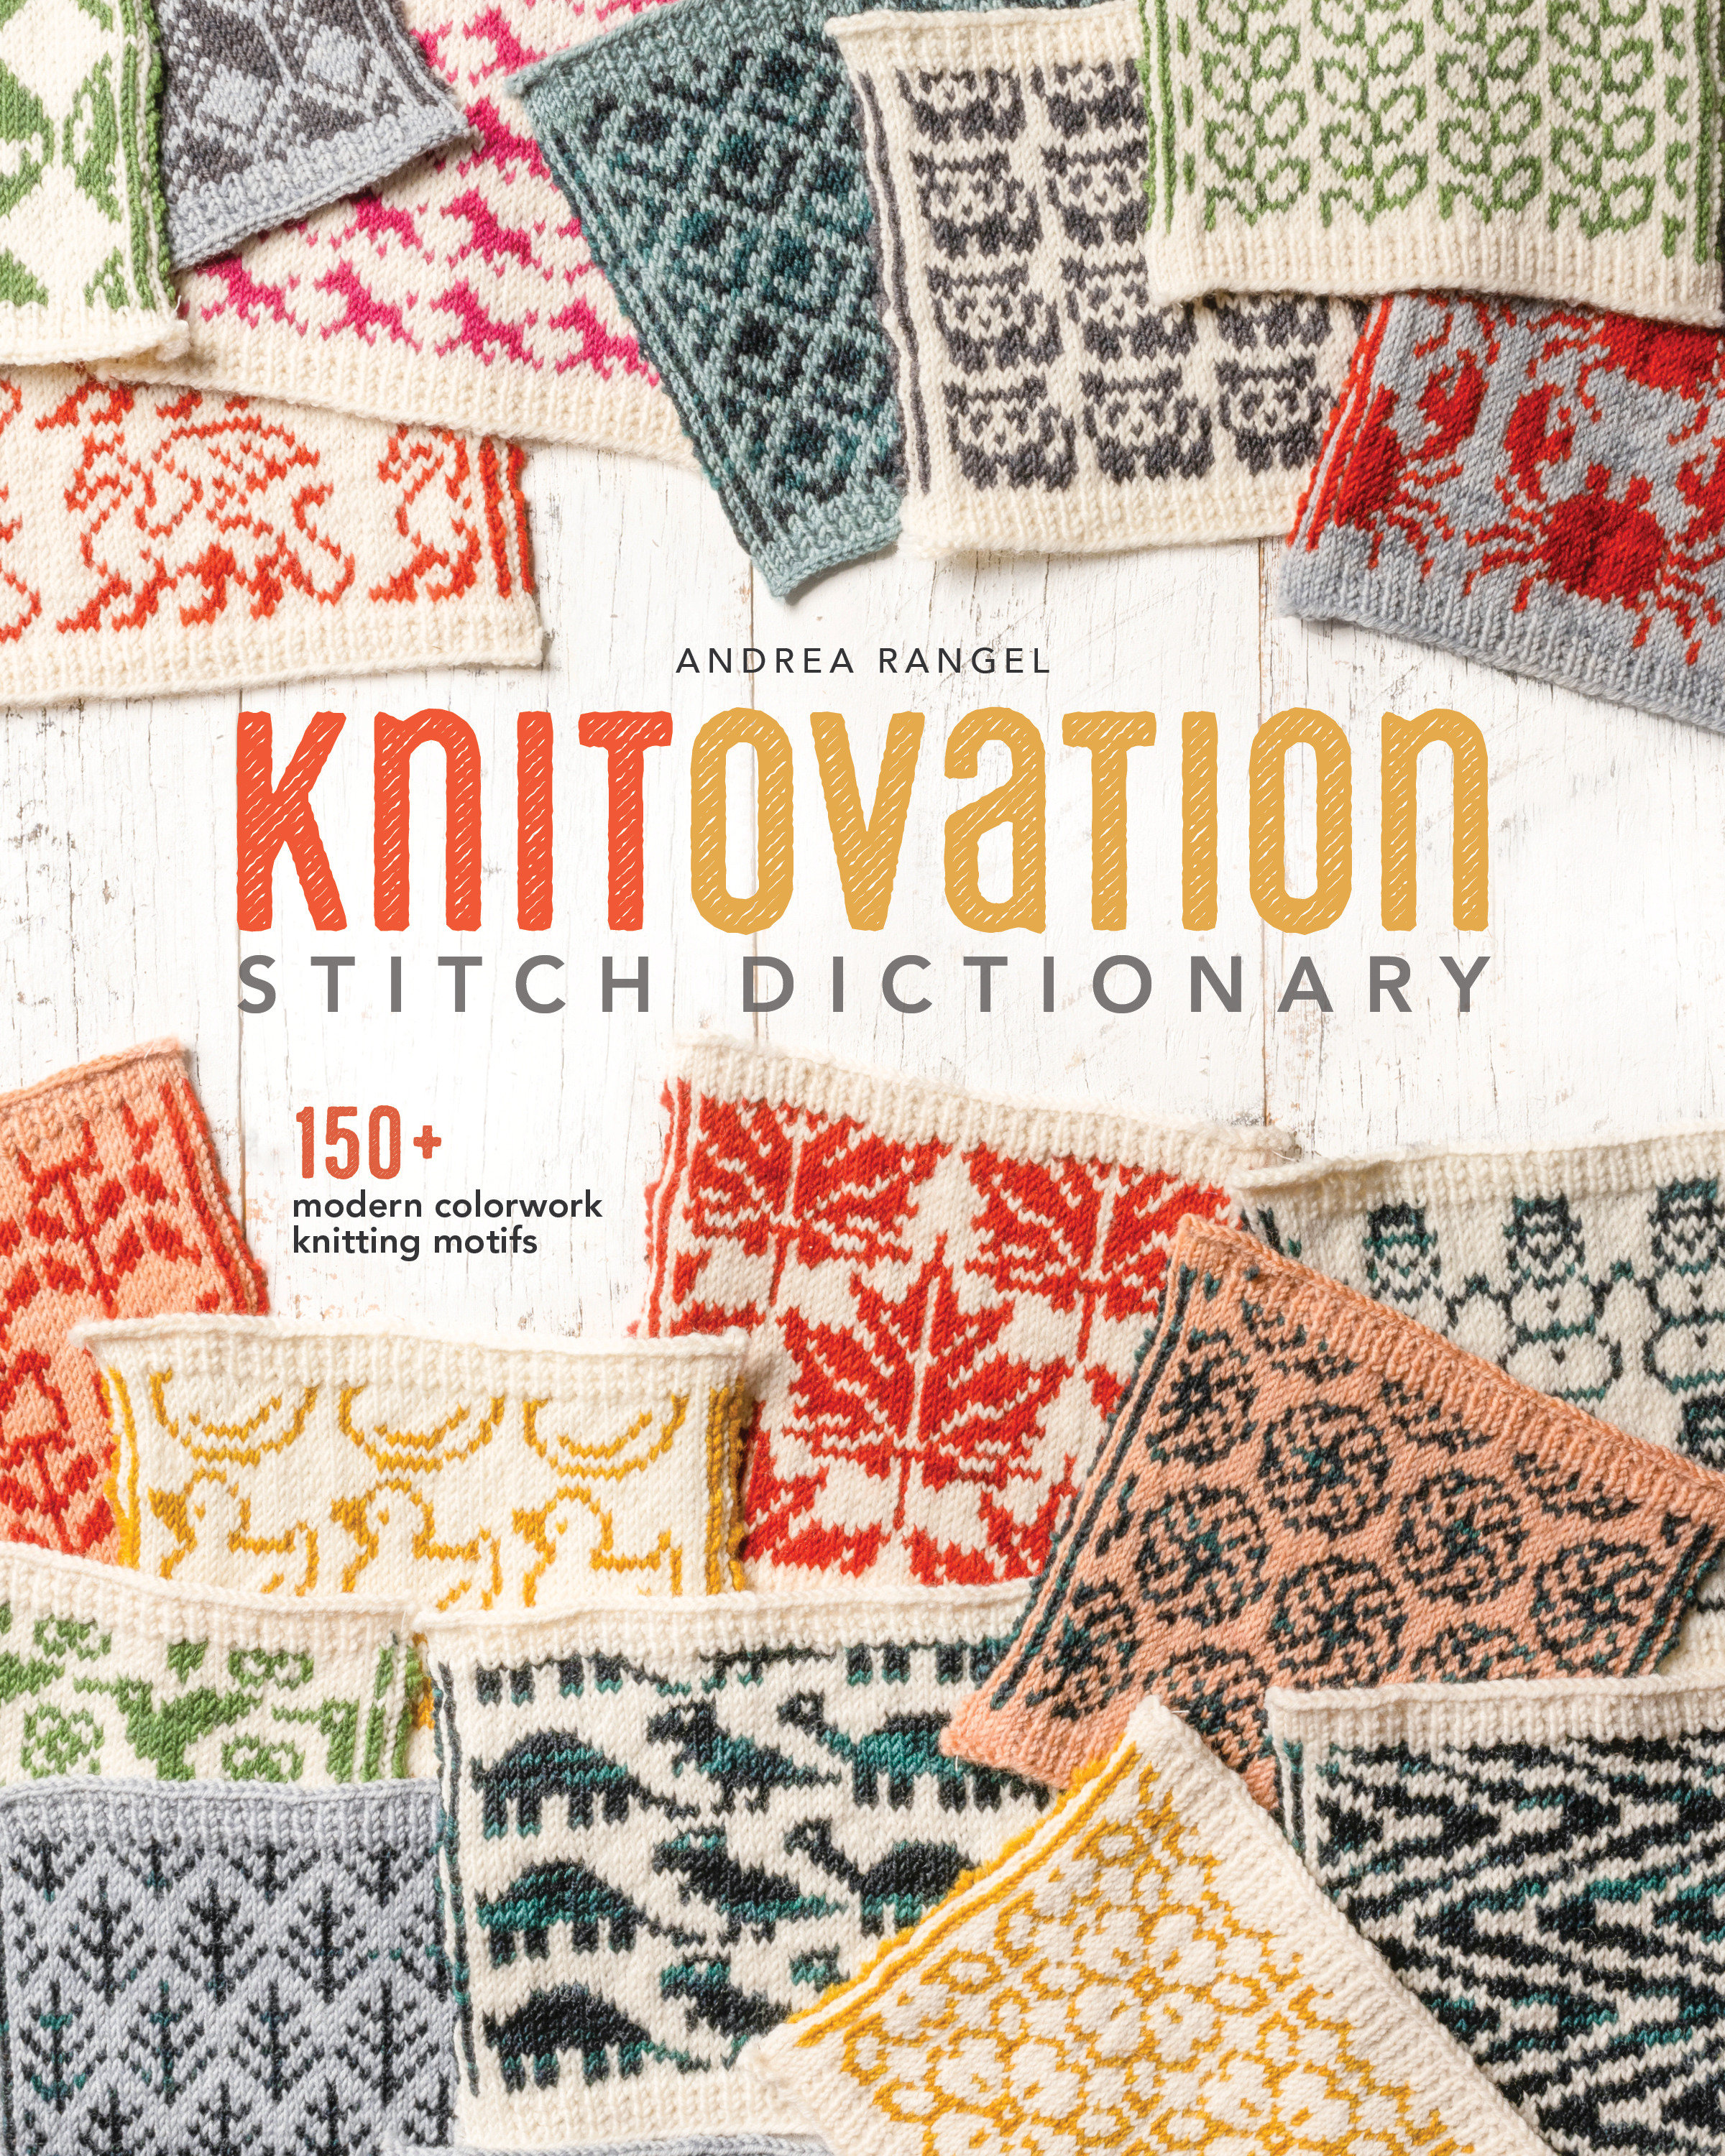 Knitovation Stitch Dictionary (Hardcover Book)